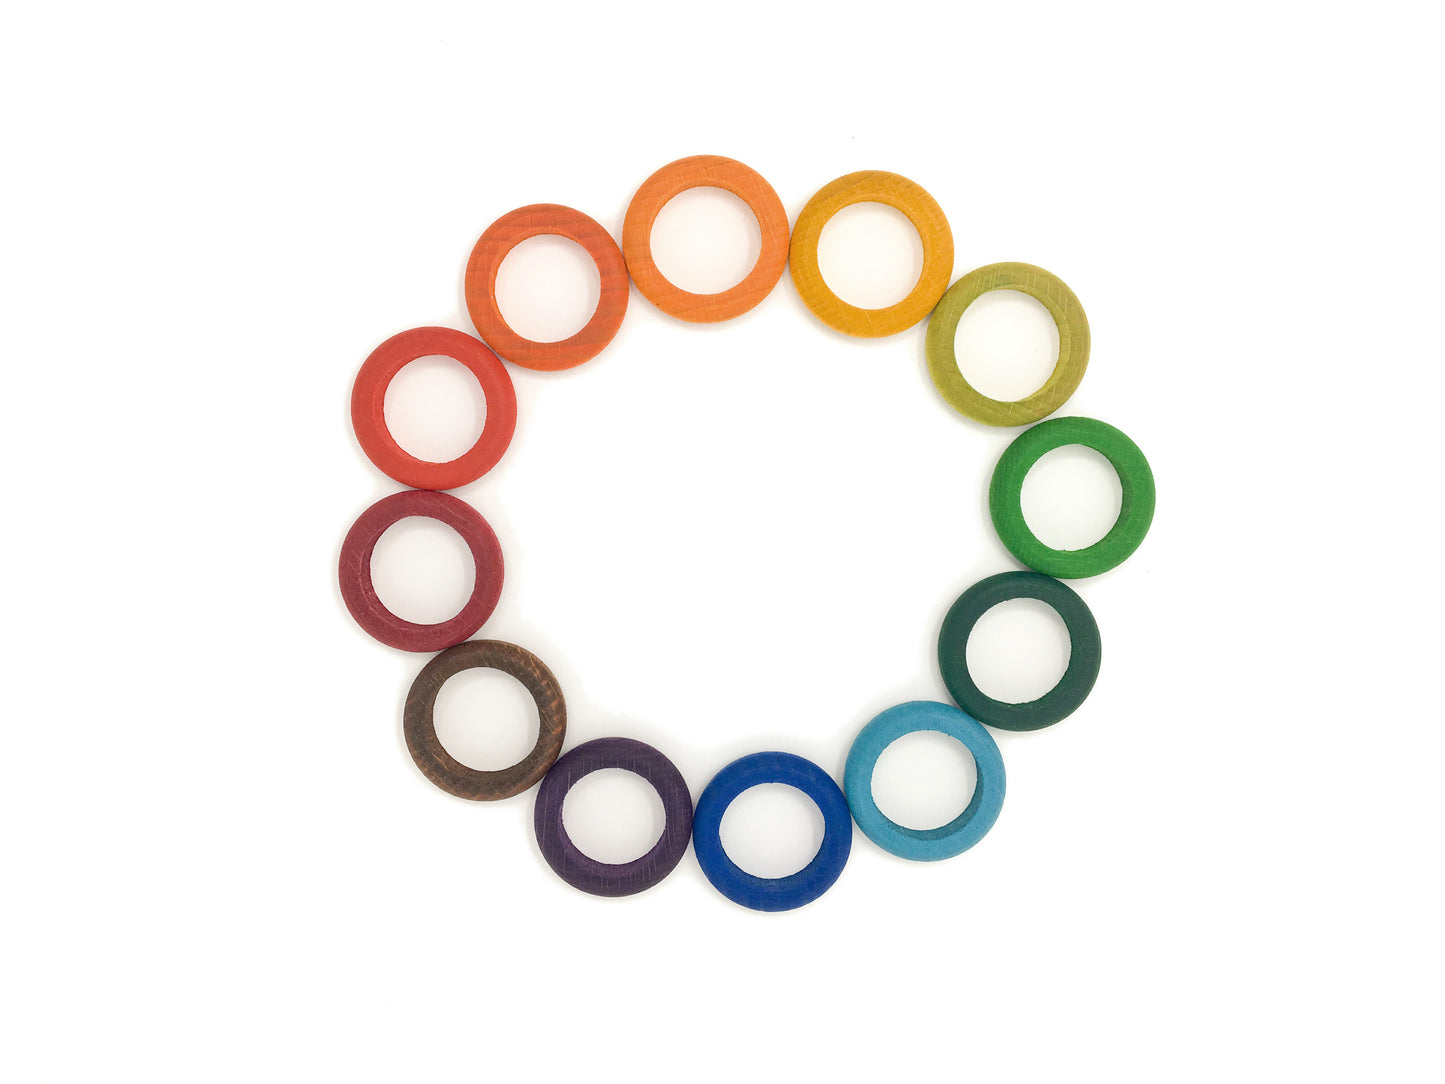 12 wooden rings in a circle, each one color of the rainbow from red to violet.